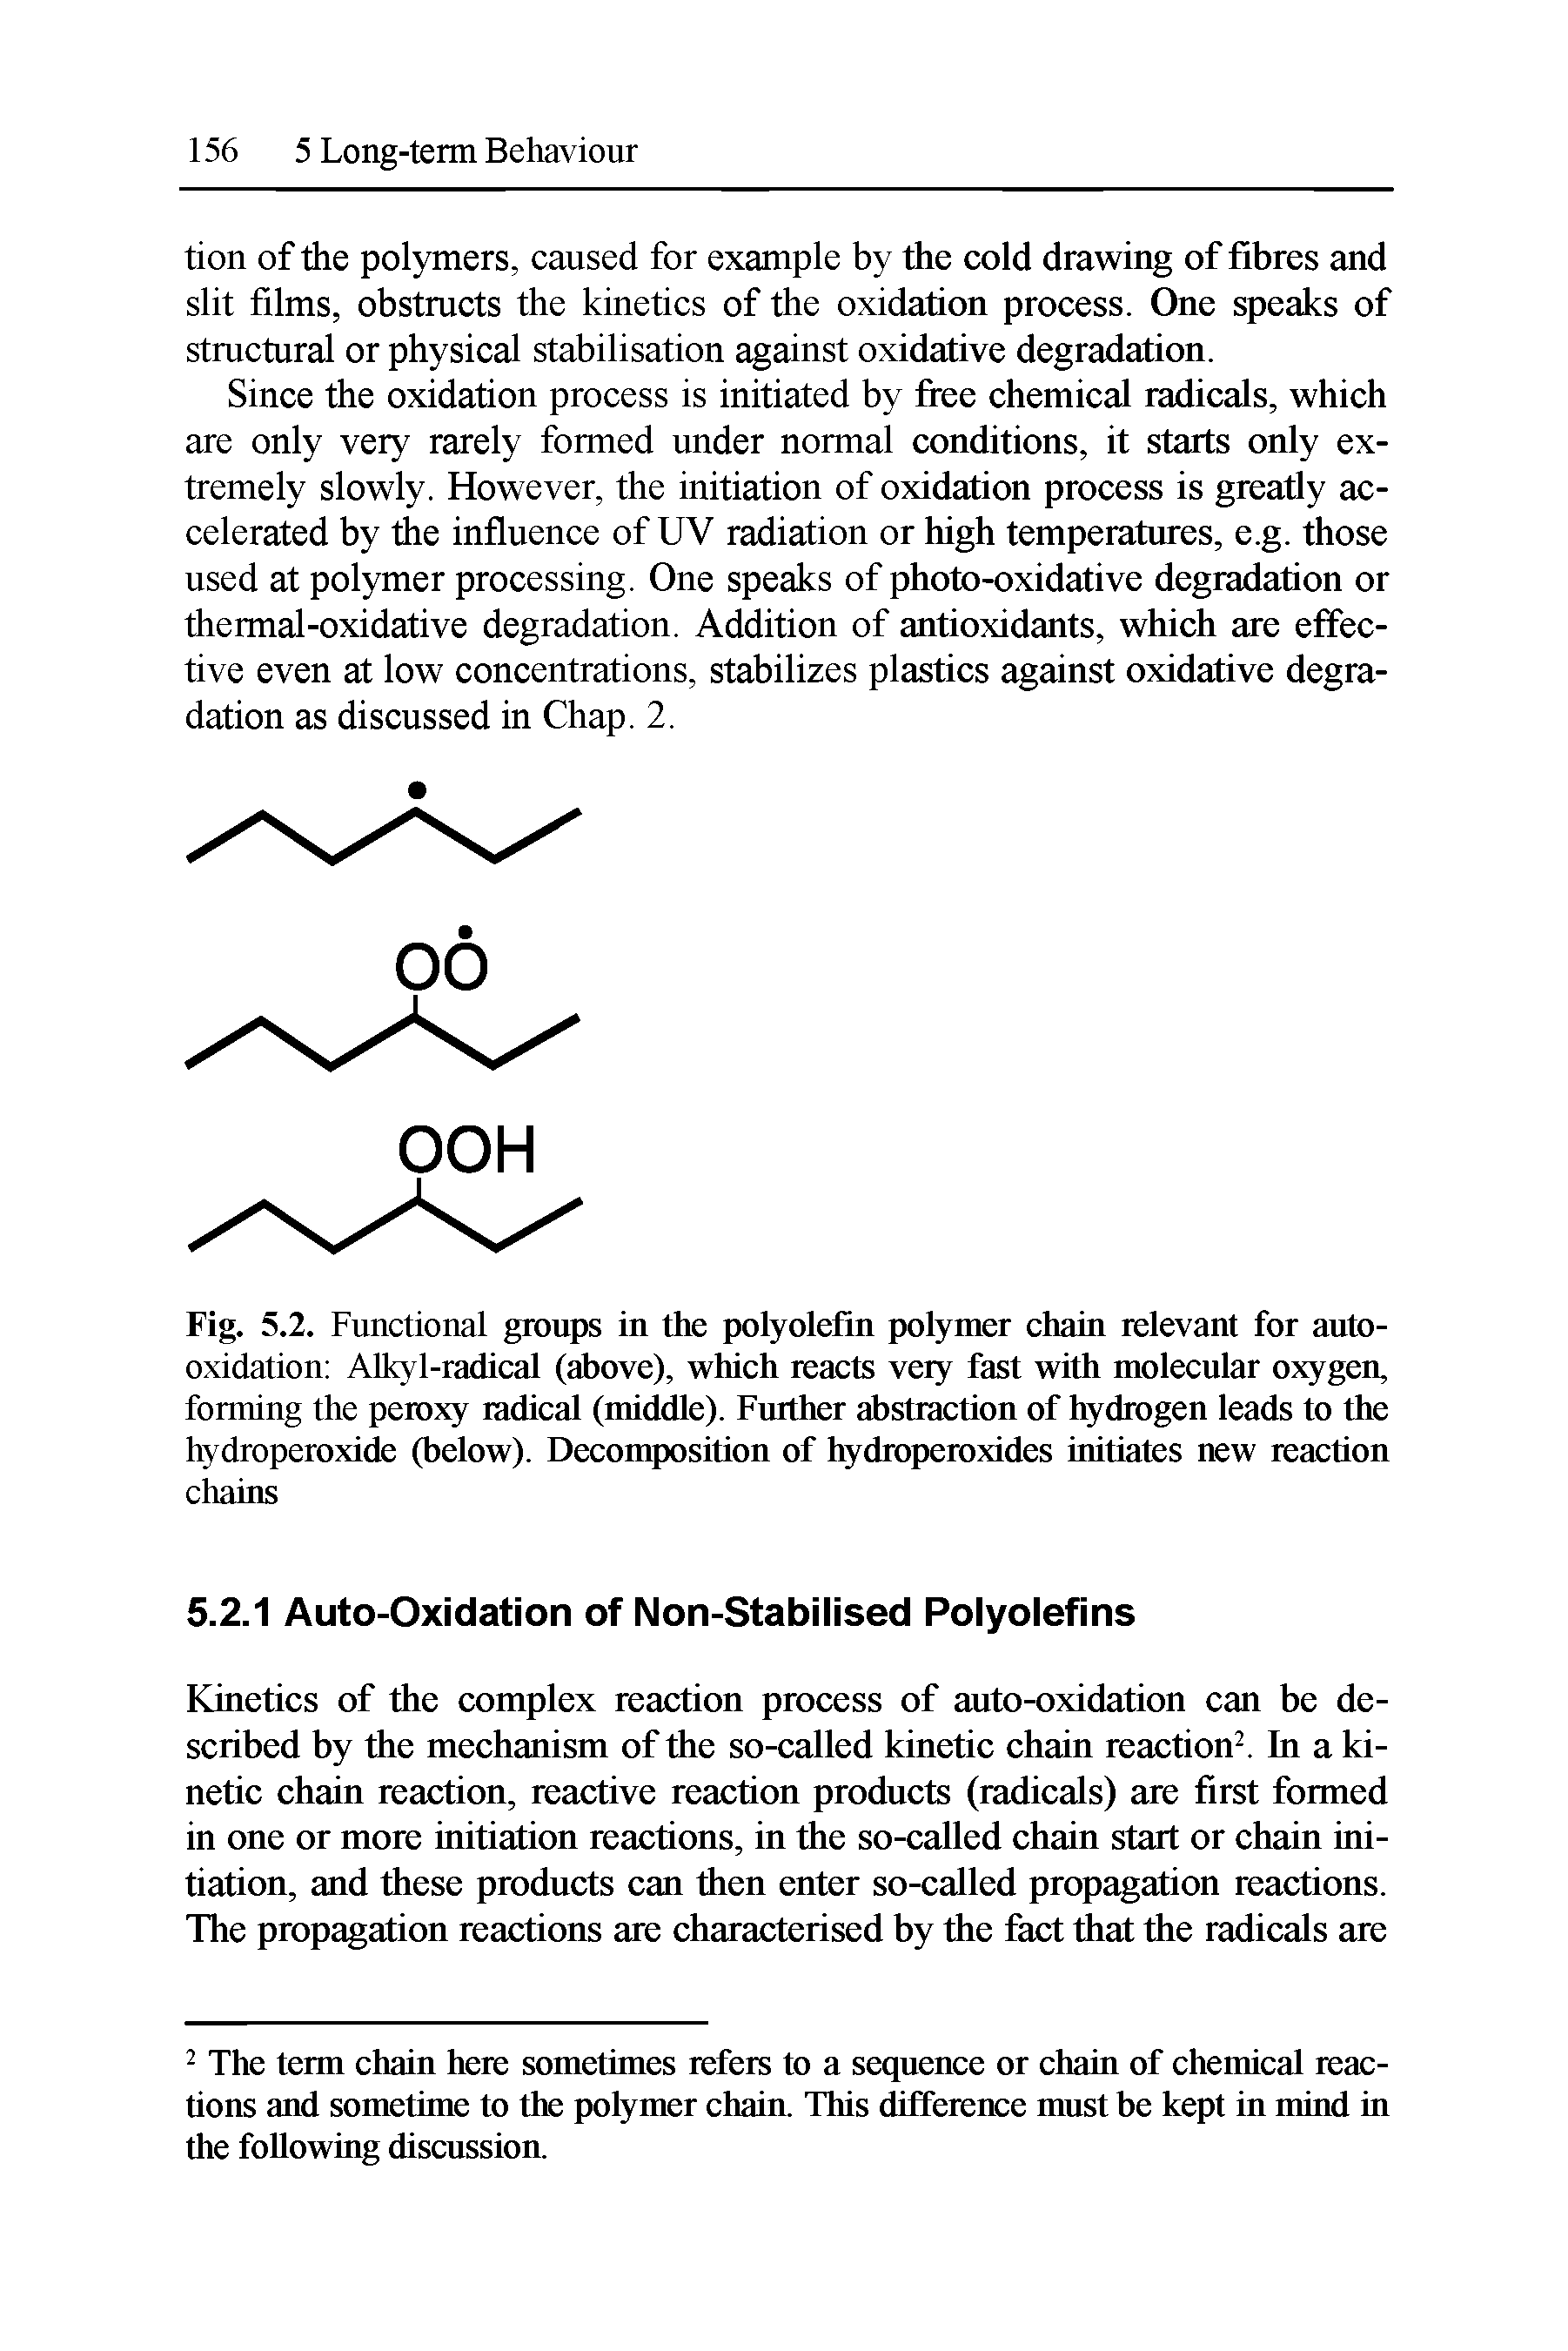 Fig. 5.2. Functional groups in the polyolefin polymer chain relevant for autooxidation Alkyl-radical (above), which reacts very fast with molecular oxygen, forming the peroxy radical (middle). Further abstraction of hydrogen leads to the hydroperoxide (below). Decomposition of hydroperoxides initiates new reaction chains...